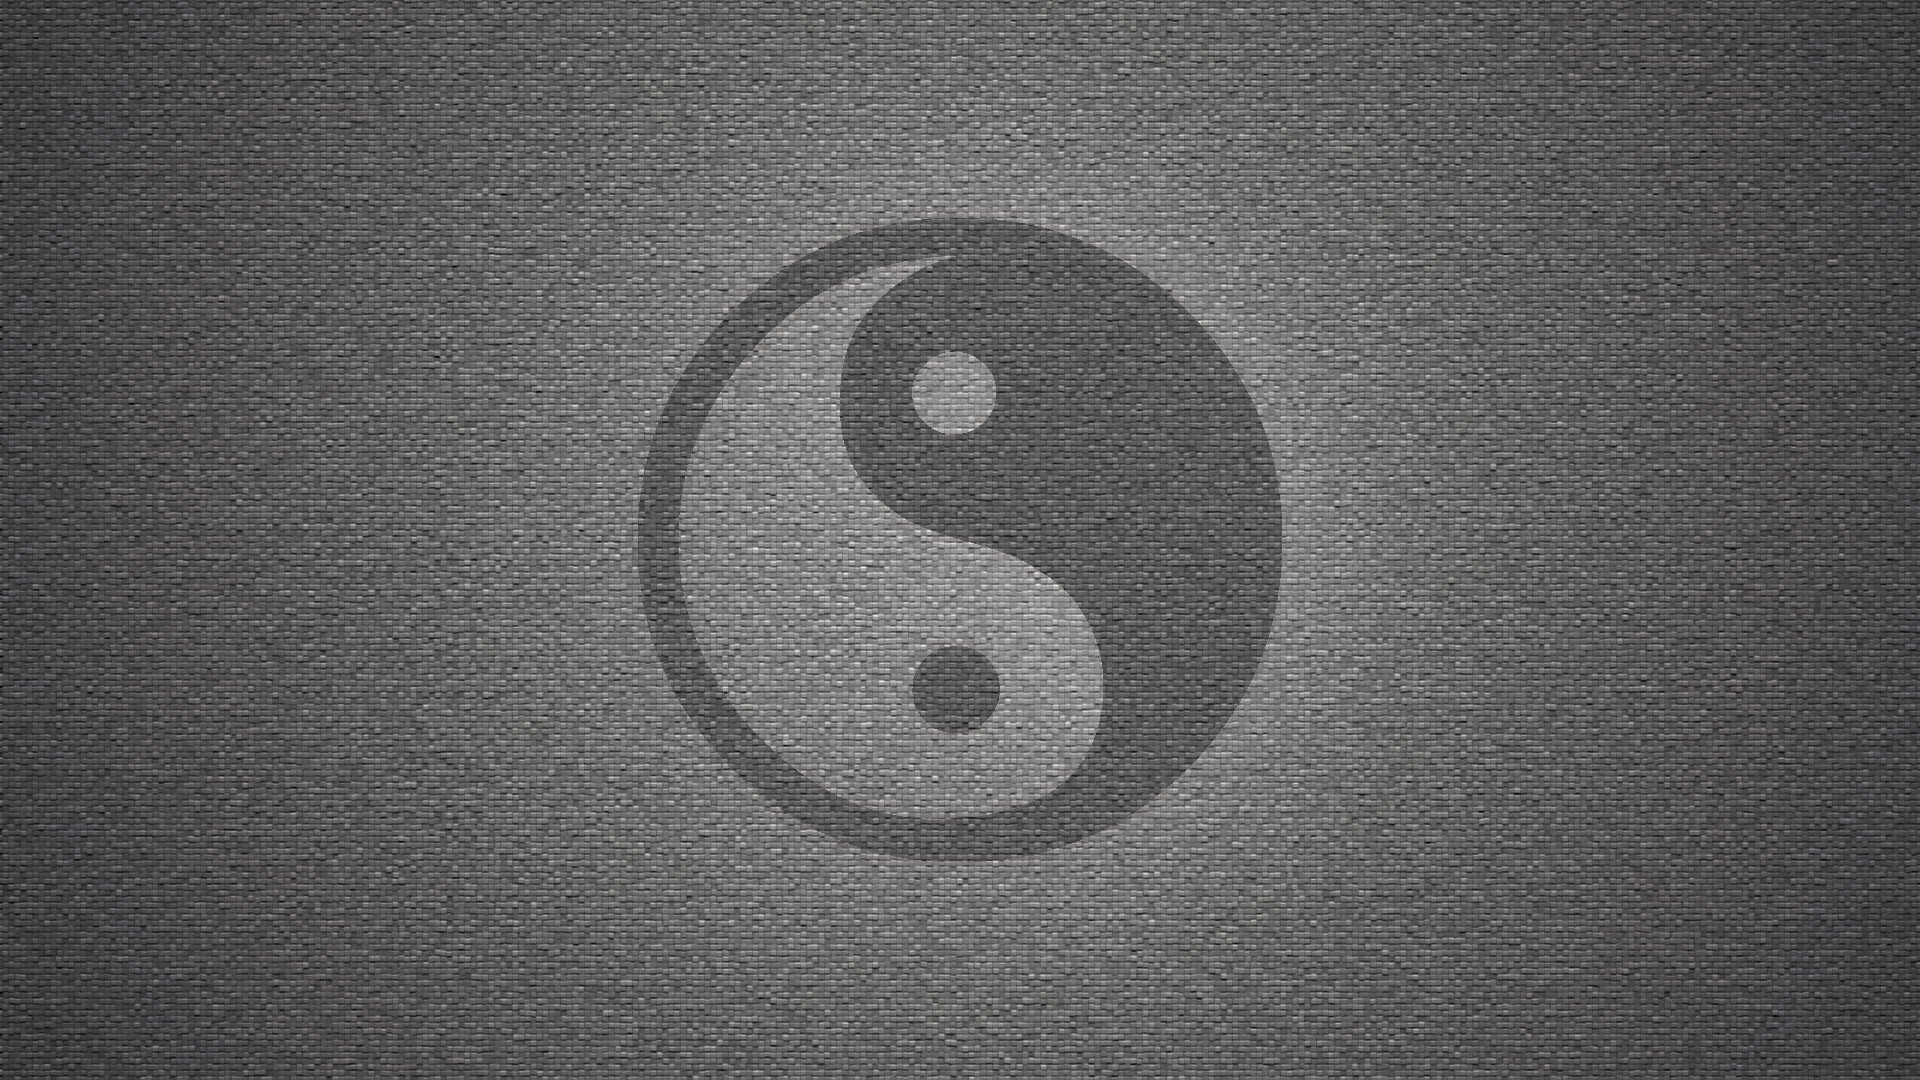 wall, Yin, Yang, Symbol, Textures, Grayscale, Backgrounds, Symbols Wallpaper